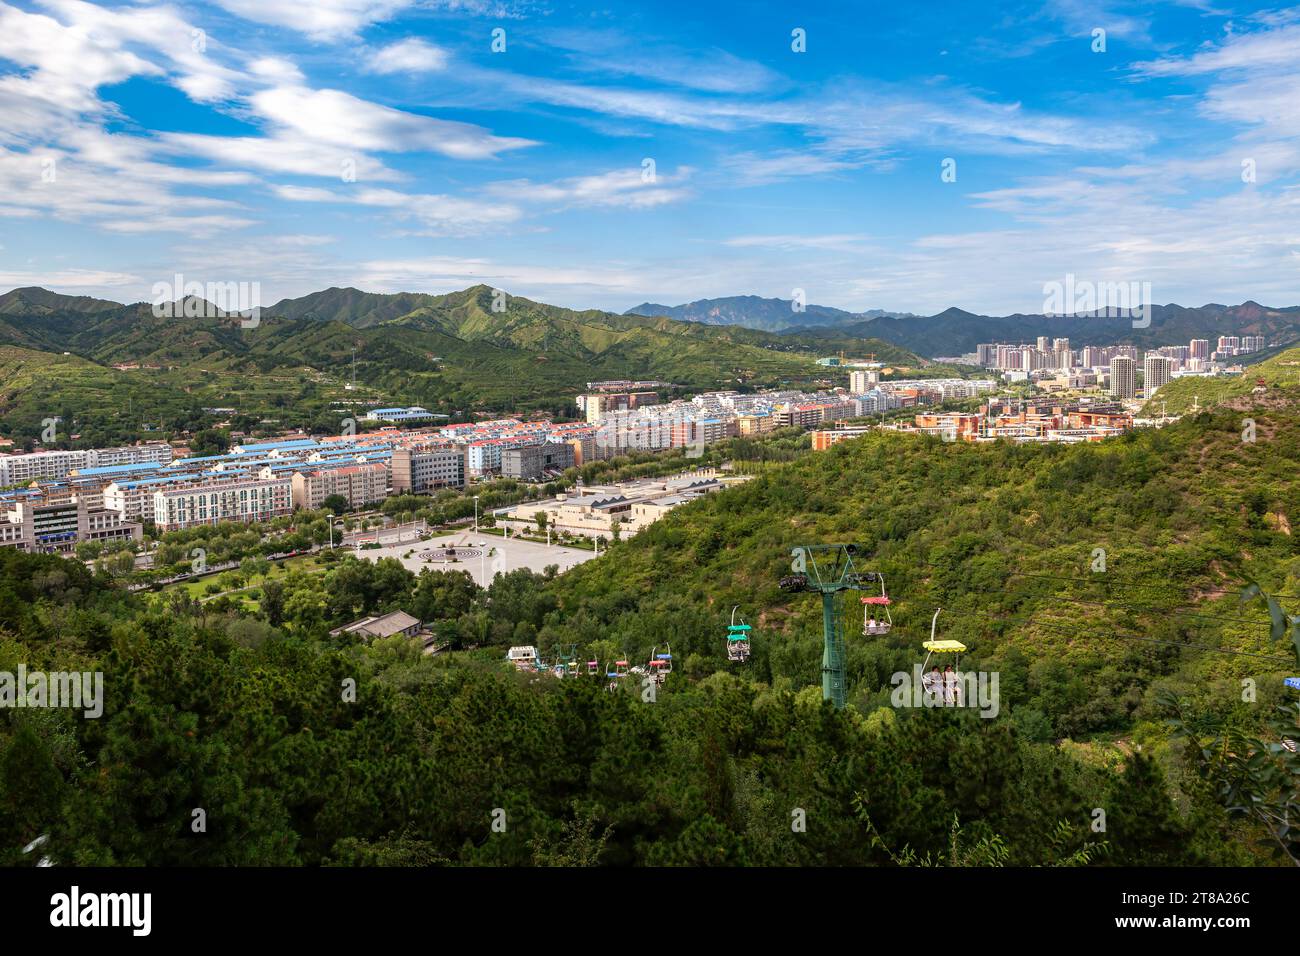 The City of Chengde in China Stock Photo